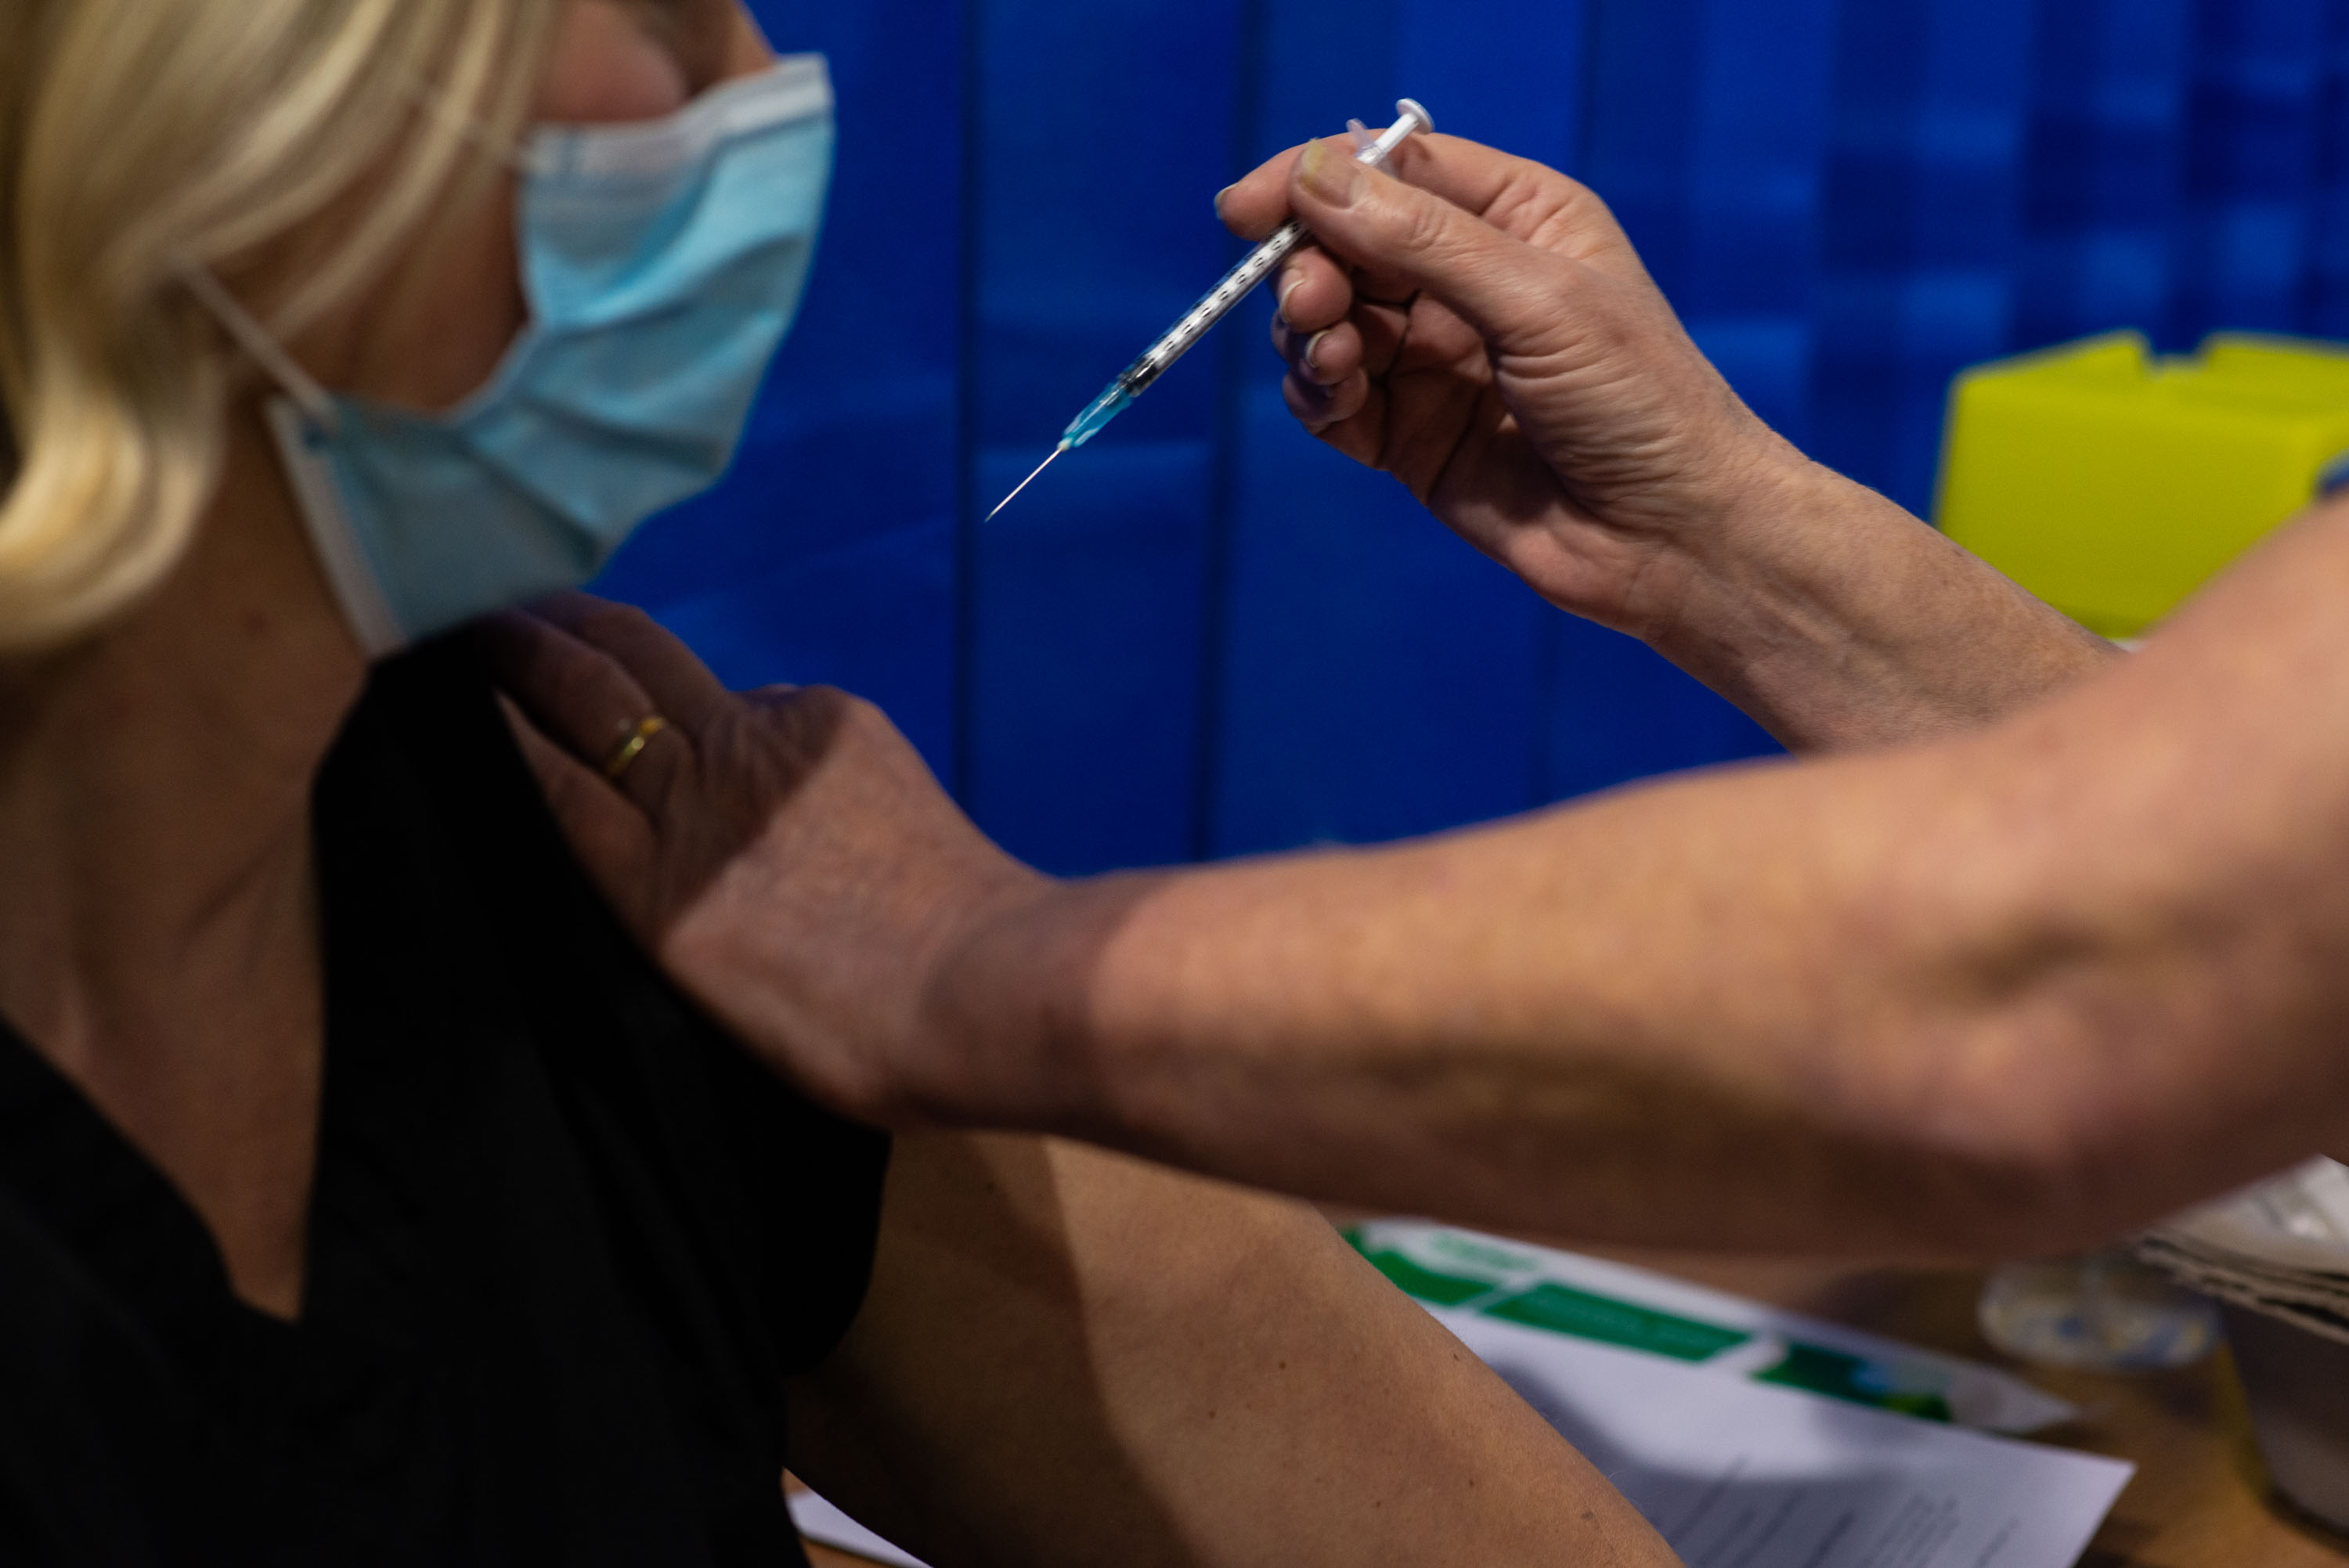 A patient receives the Pfizer/BioNTech Covid-19 vaccine as the UK vaccination rollout gets underway at a health center in Cardiff, Wales, on Tuesday, December 8.